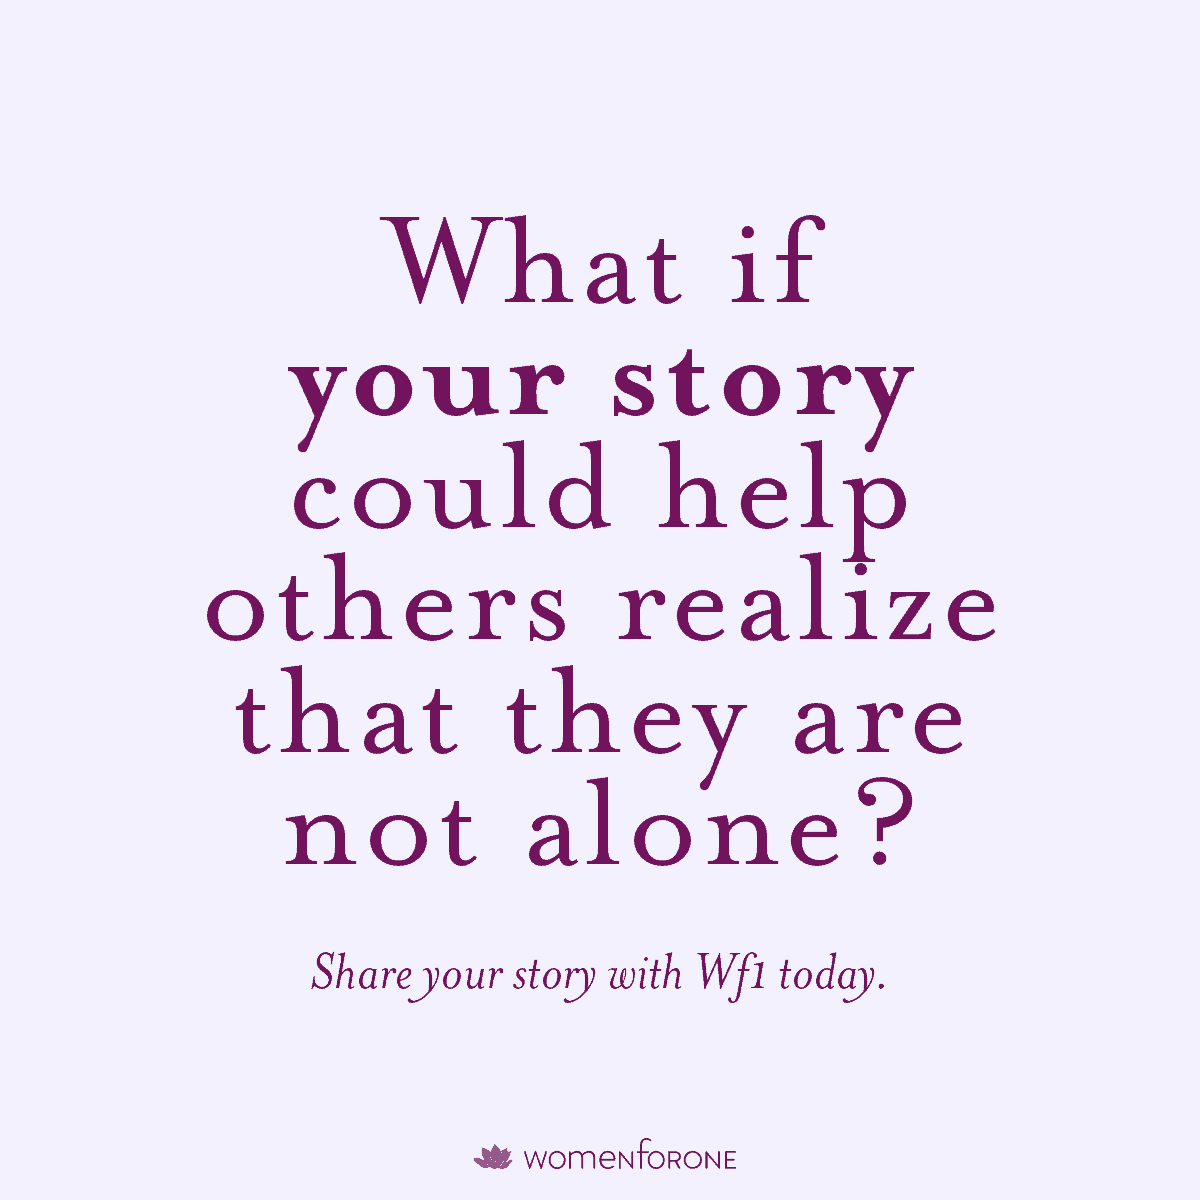 What if your story could help others realize that they are not alone?